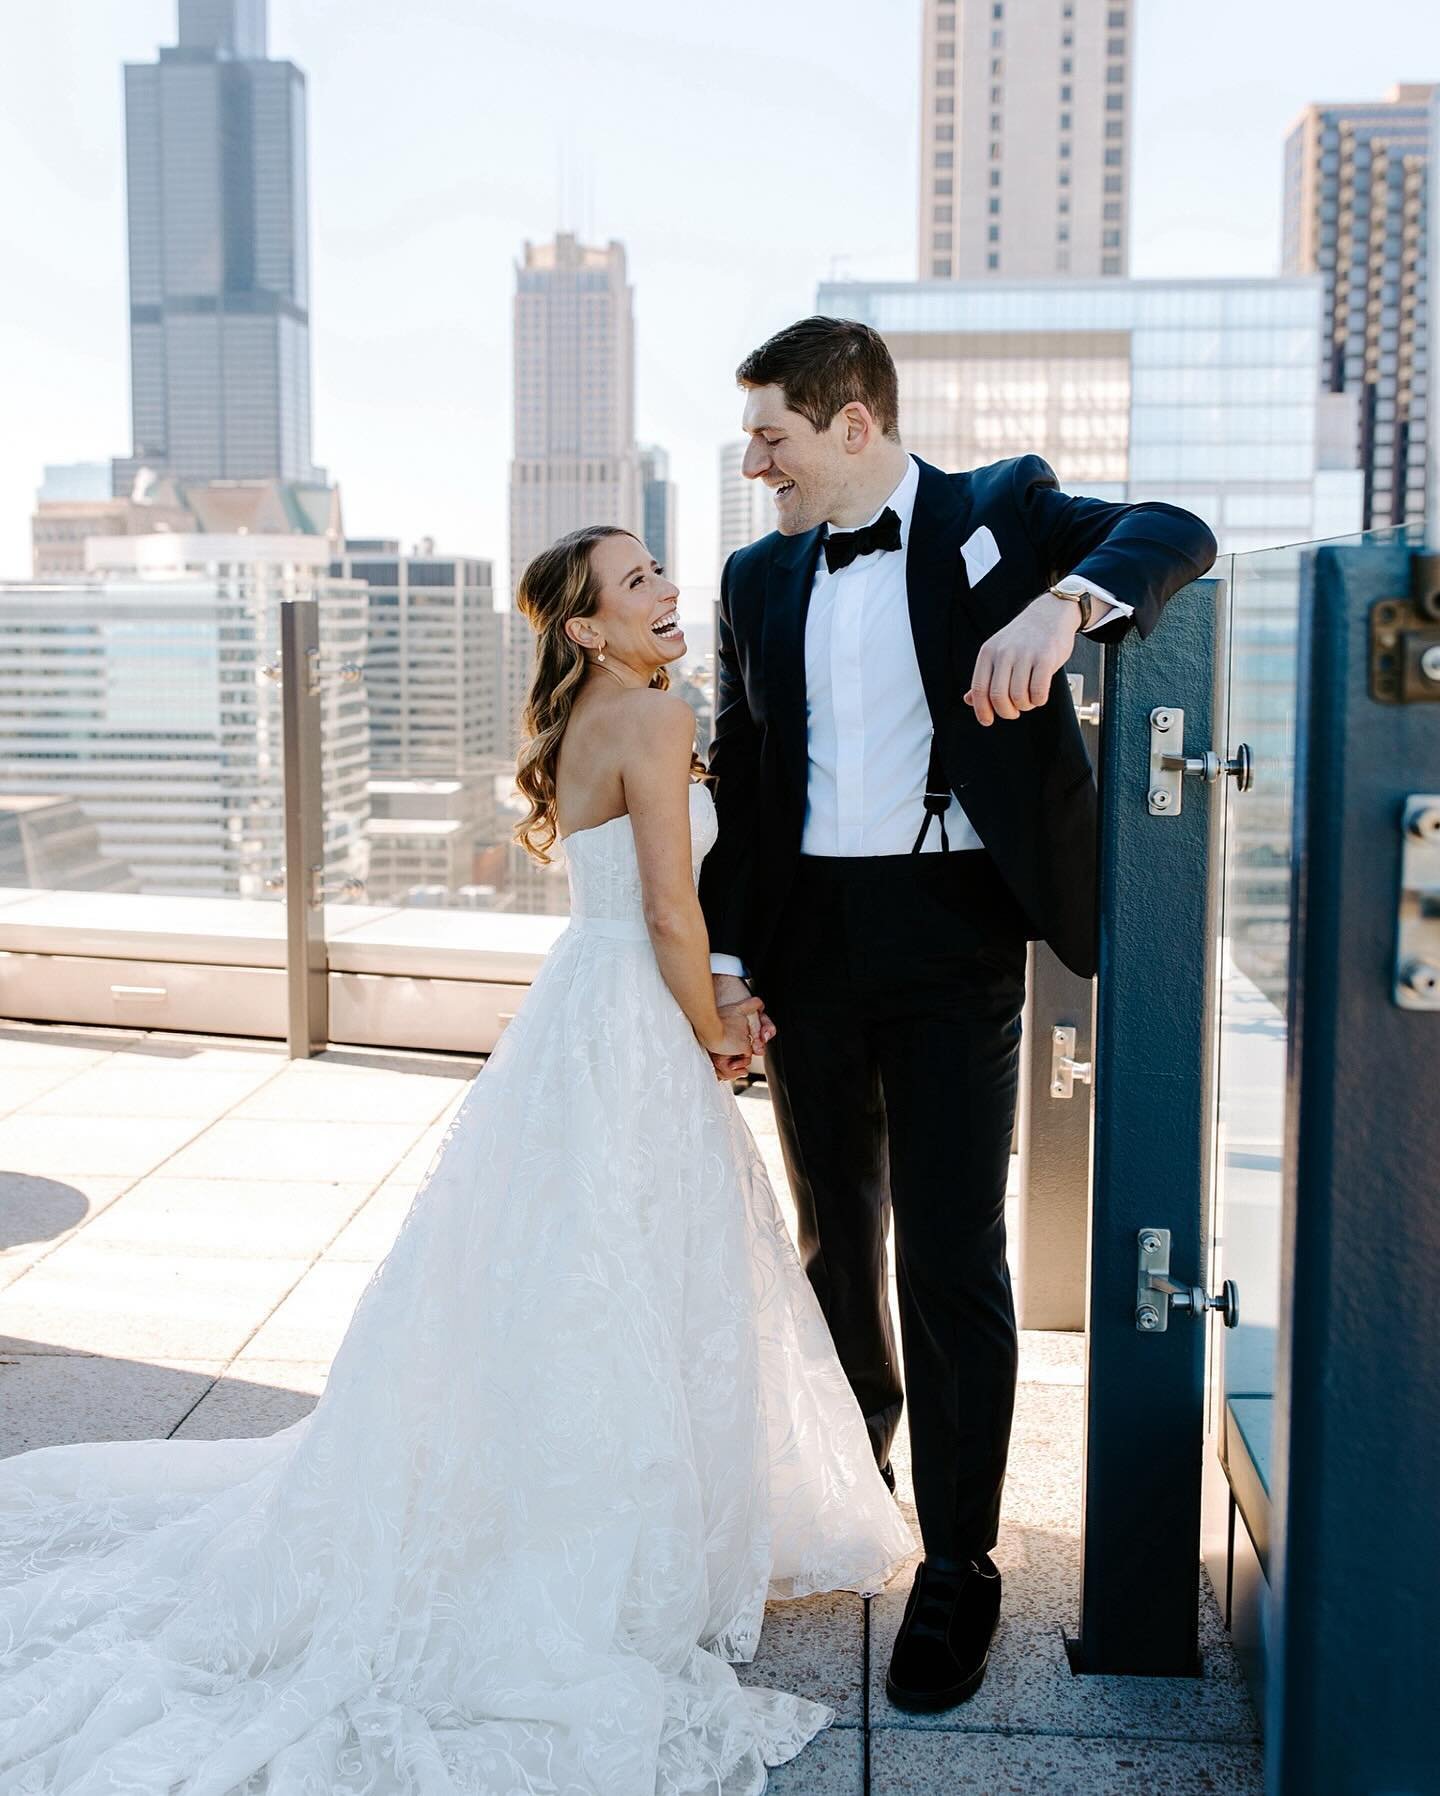 Moments from Haley + Danny&rsquo;s magical day in the city last weekend!!!🤍🏙️ these two are some of the kindest people, they love each other + their people hard, and their smiles will truly light up the world forever and a day!!!! 

I&rsquo;ll reme